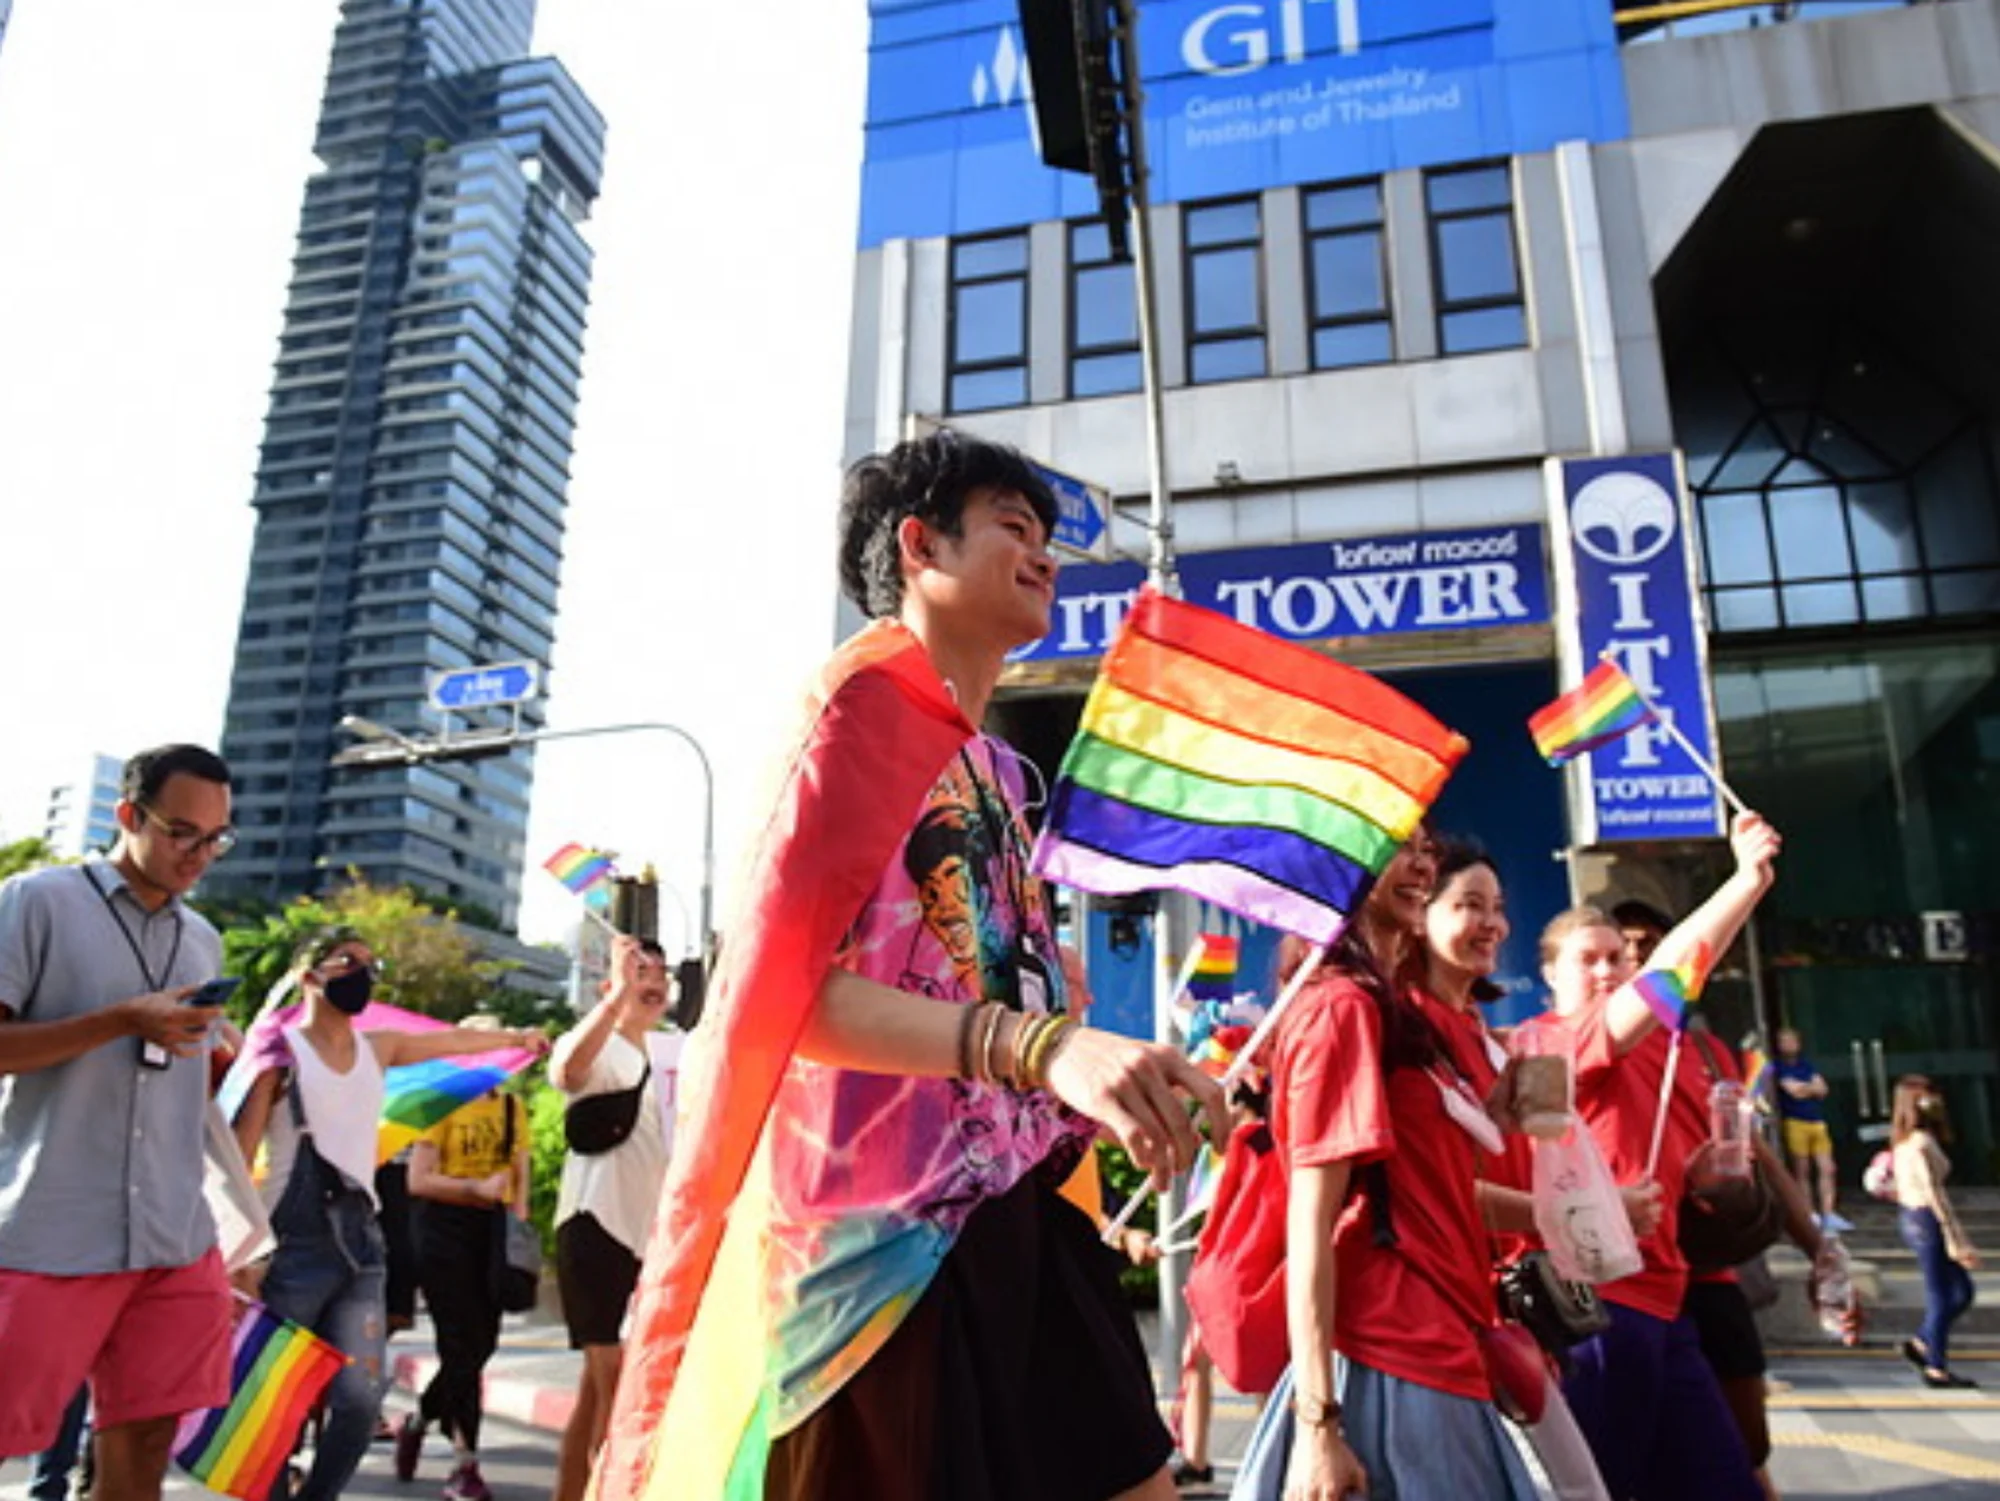 a colorful lgbtq protest taking place in thailand many people are gathered wearing colorful clothes and waving flags